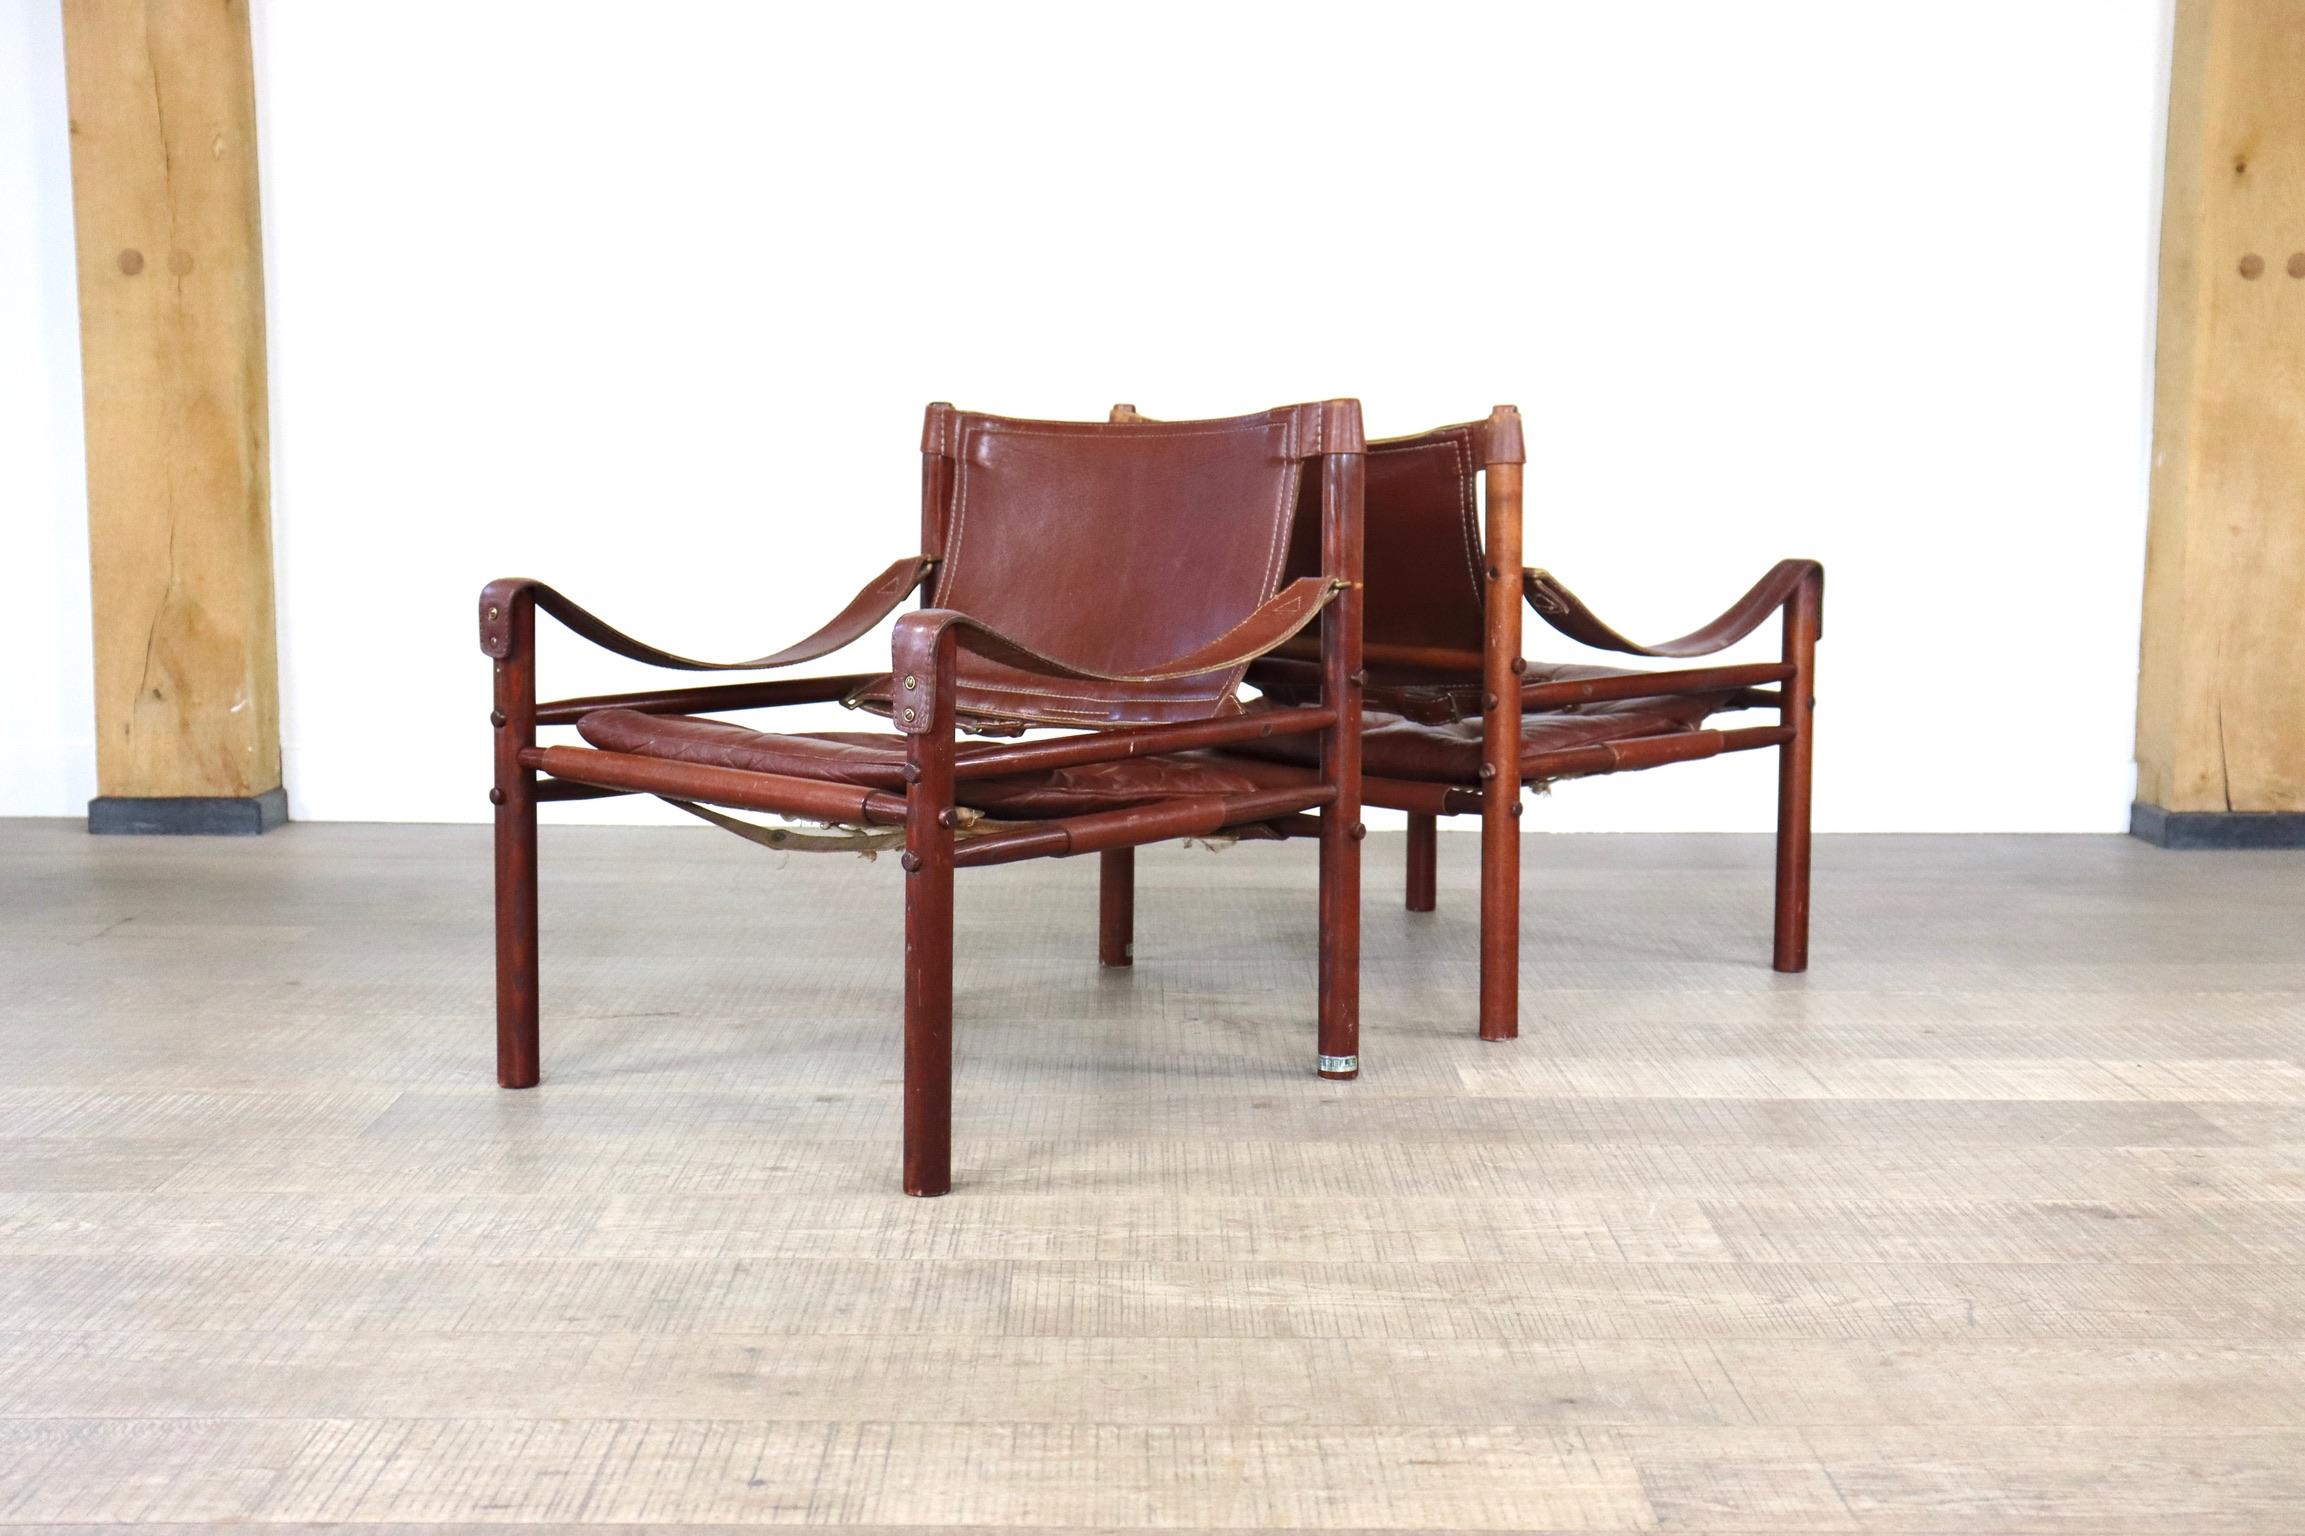 Pair of Arne Norell Sirocco Easy Chairs in Cognac Leather for Norell AB, Sweden 1